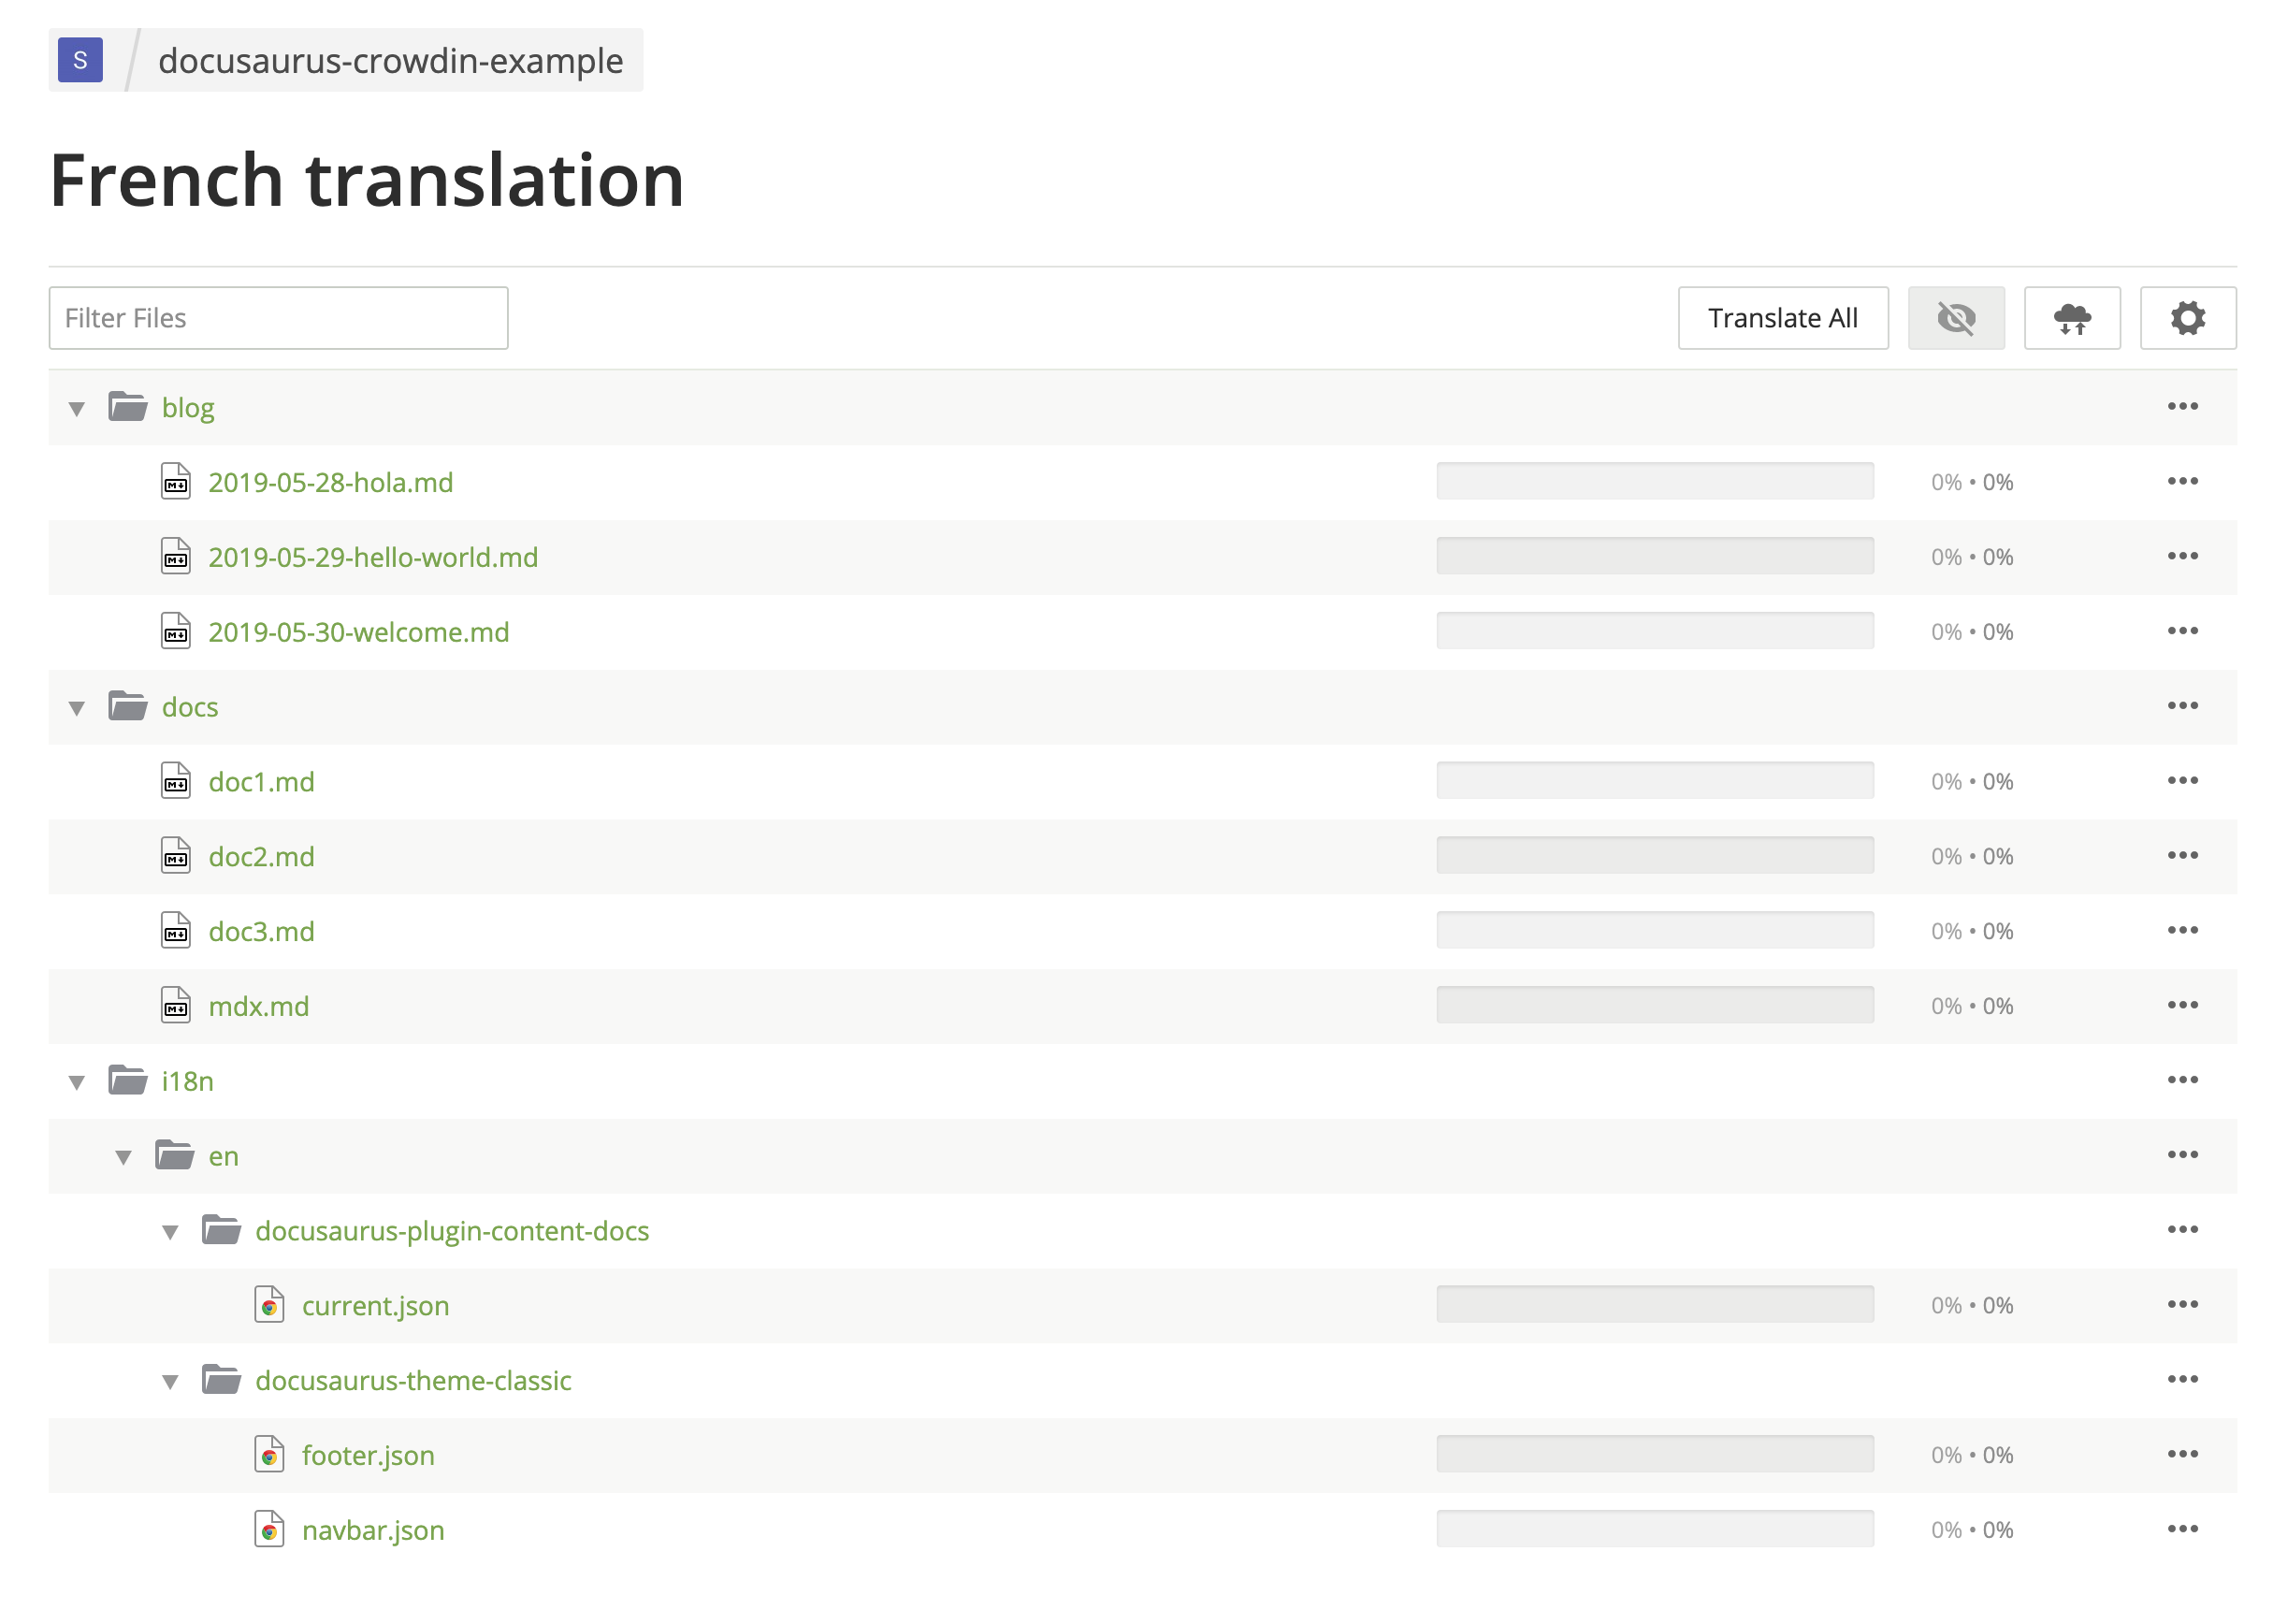 Crowdin UI showing French translation files